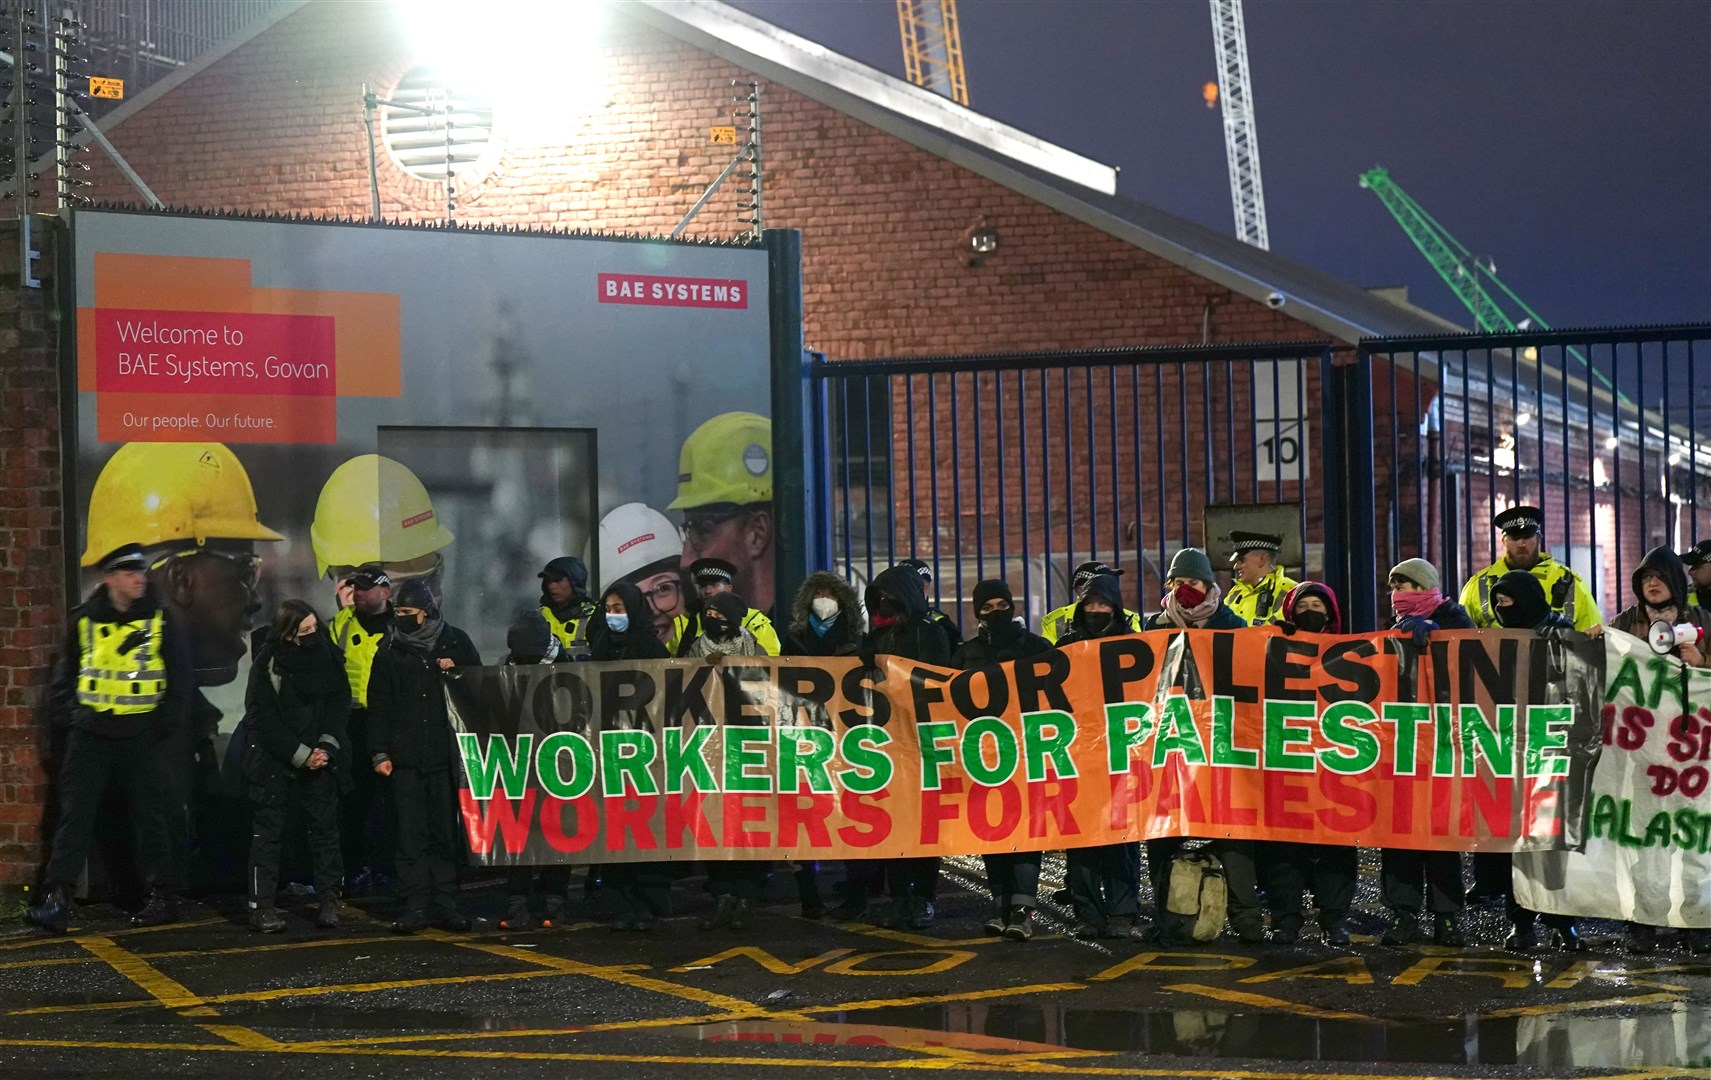 Protesters form a blockade outside BAE Systems in the Govan area (Jane Barlow/PA)